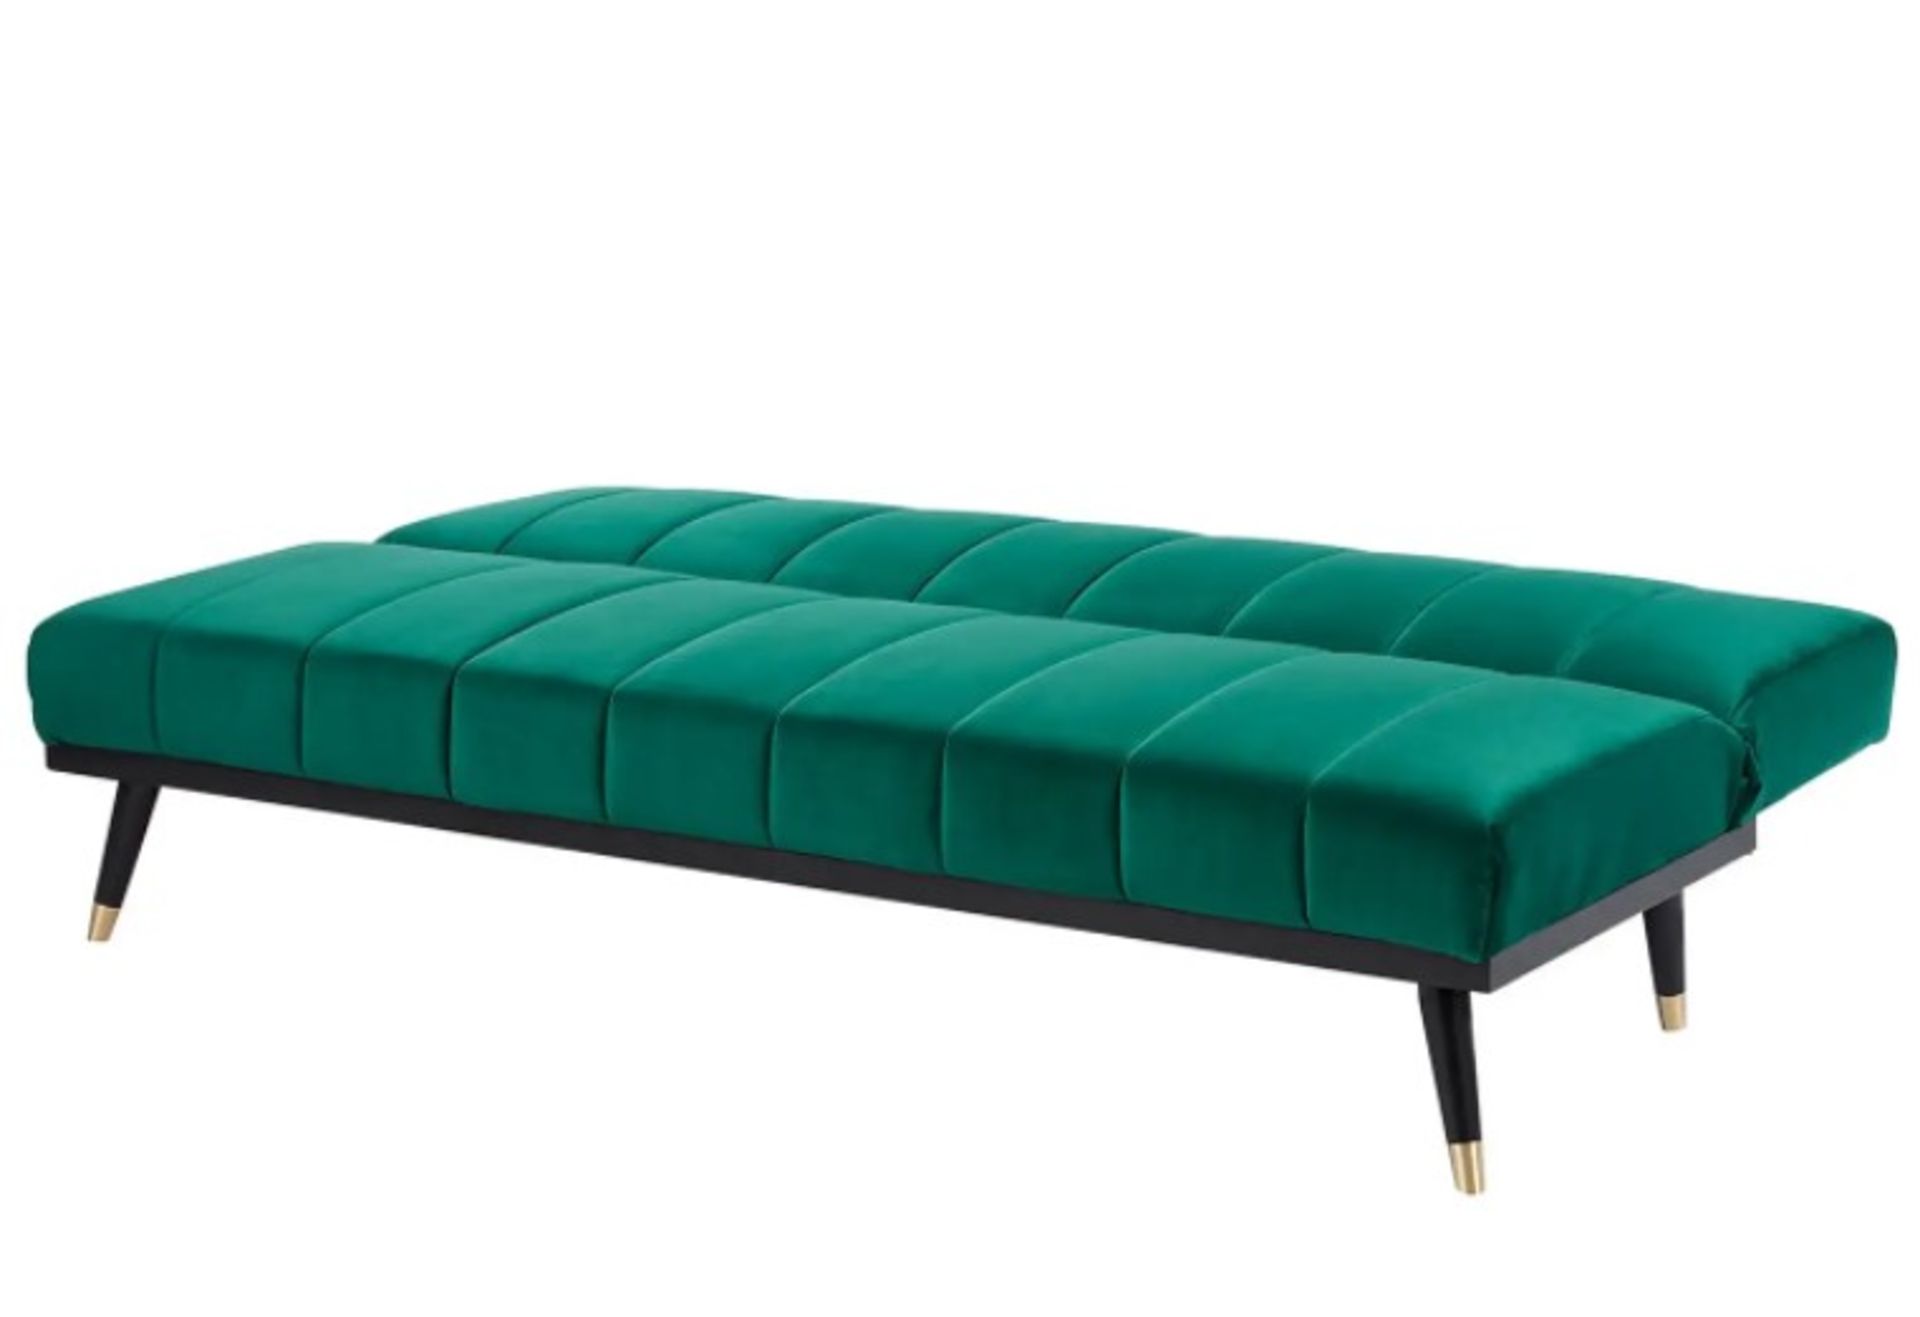 1x Sindy Sofa Bed Luxe Emerald Green (With Legs) RRP £250. Sofa : (H)82 x (W)181 x (D)83cm. Sofa - Image 5 of 7